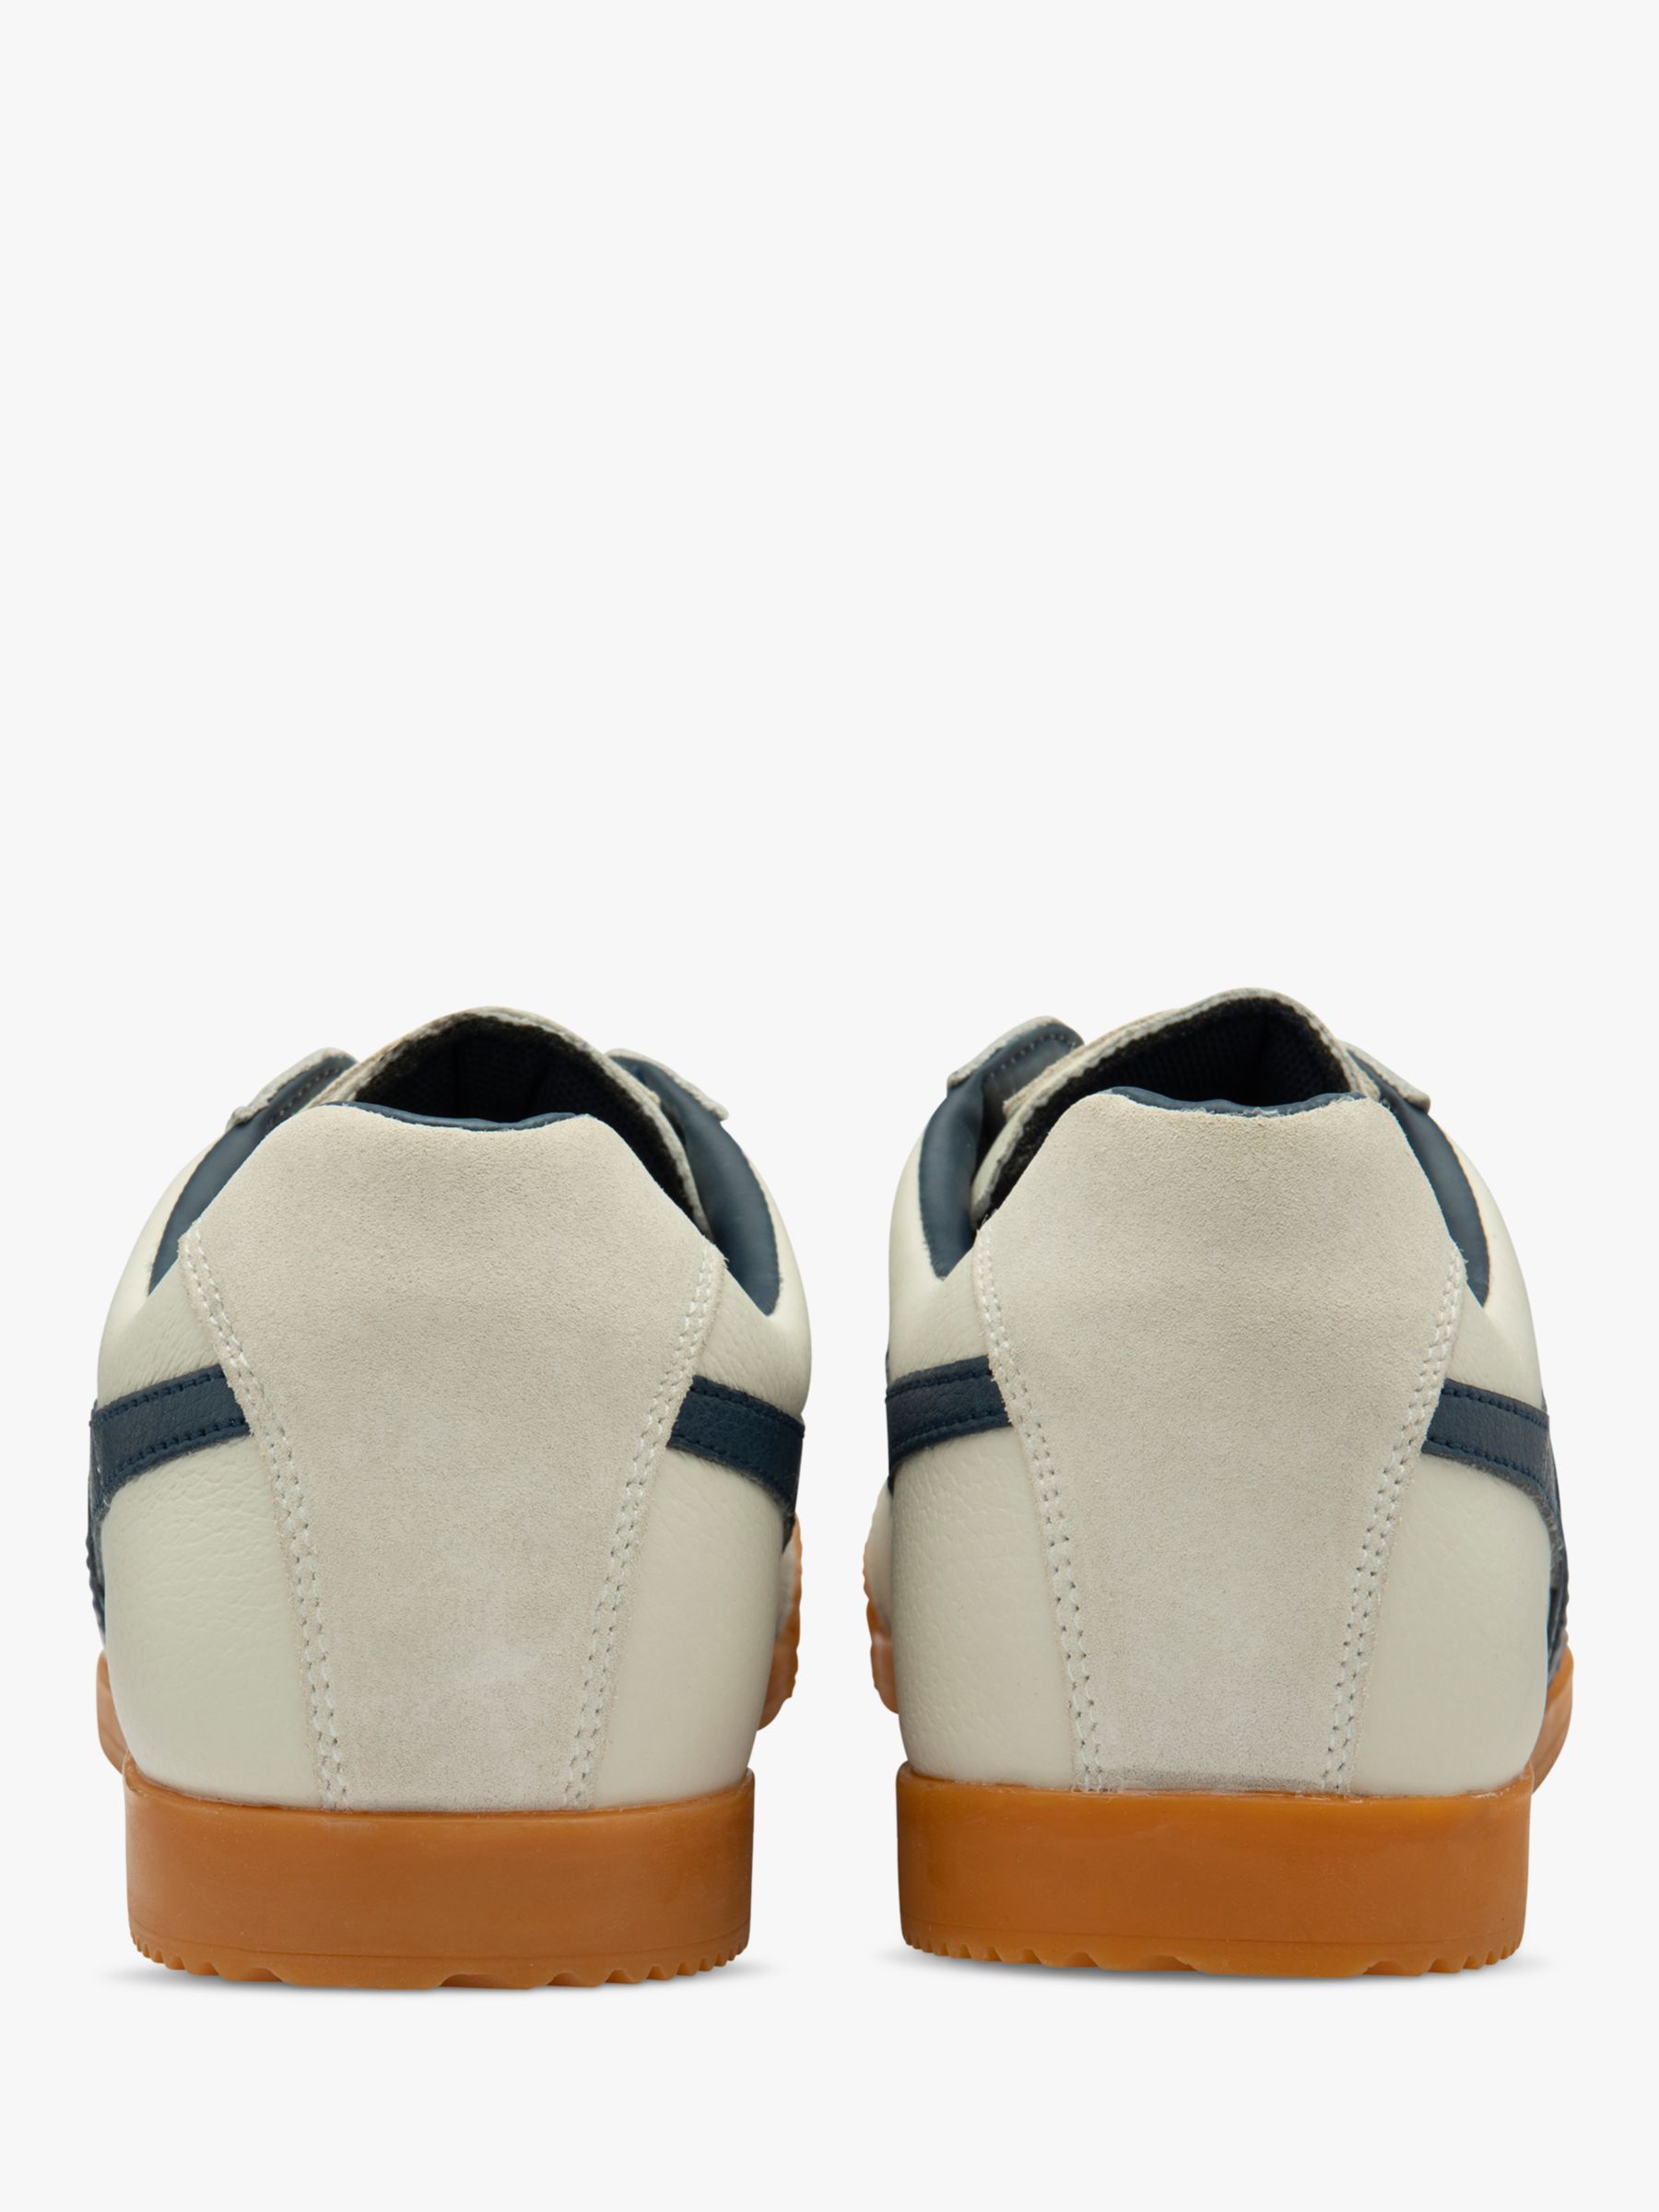 Buy Gola Classics Harrier Leather Lace Up Trainers, Off White/Navy Online at johnlewis.com